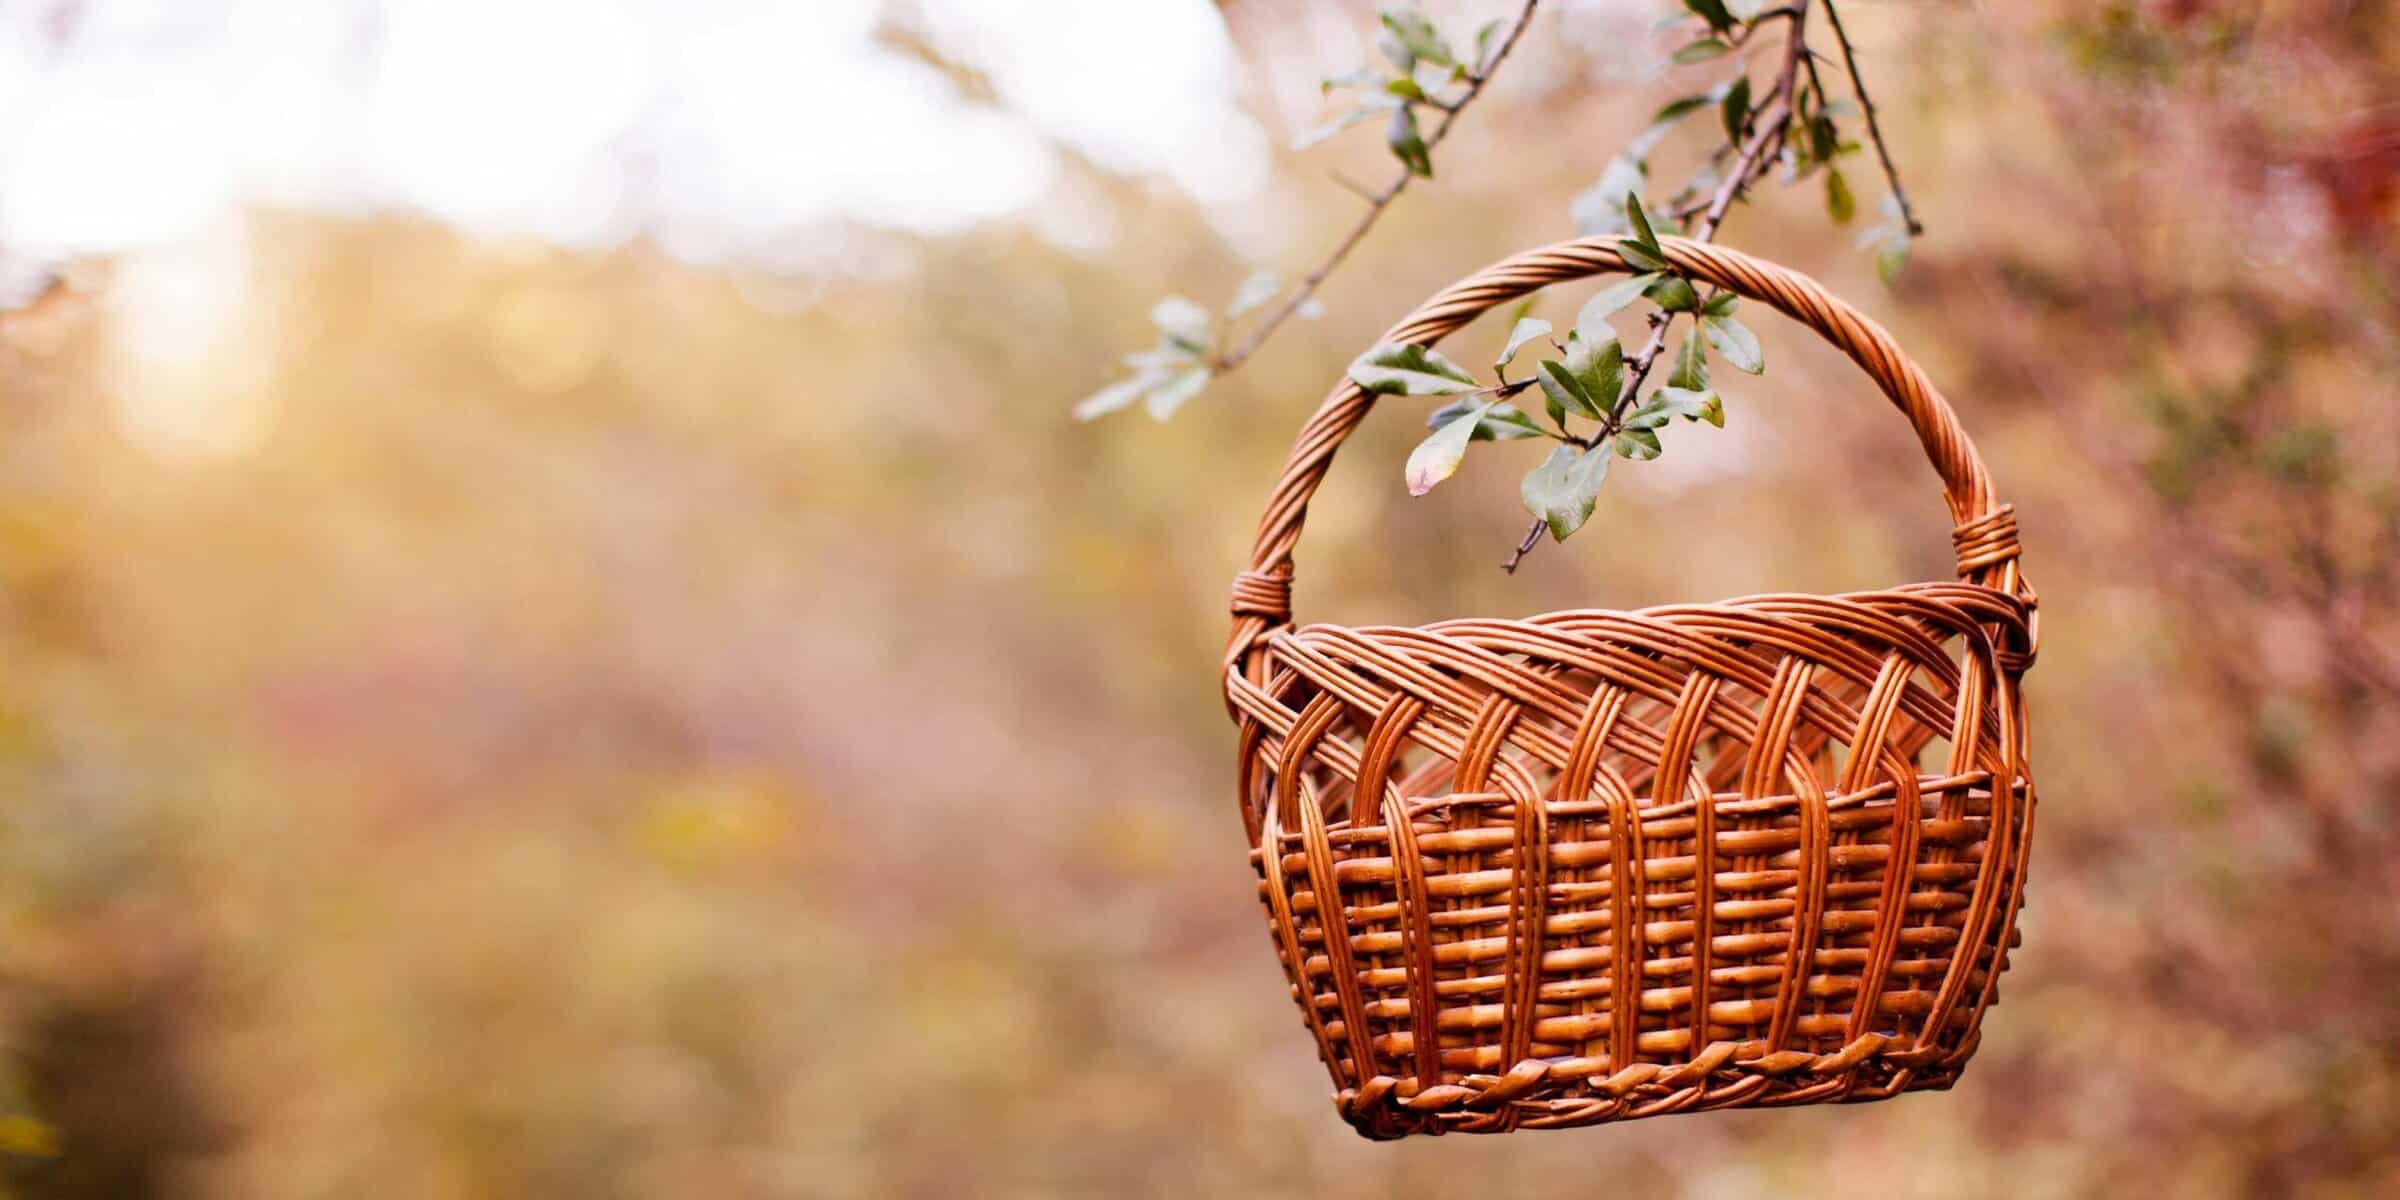 How to Clean A Wicker Basket